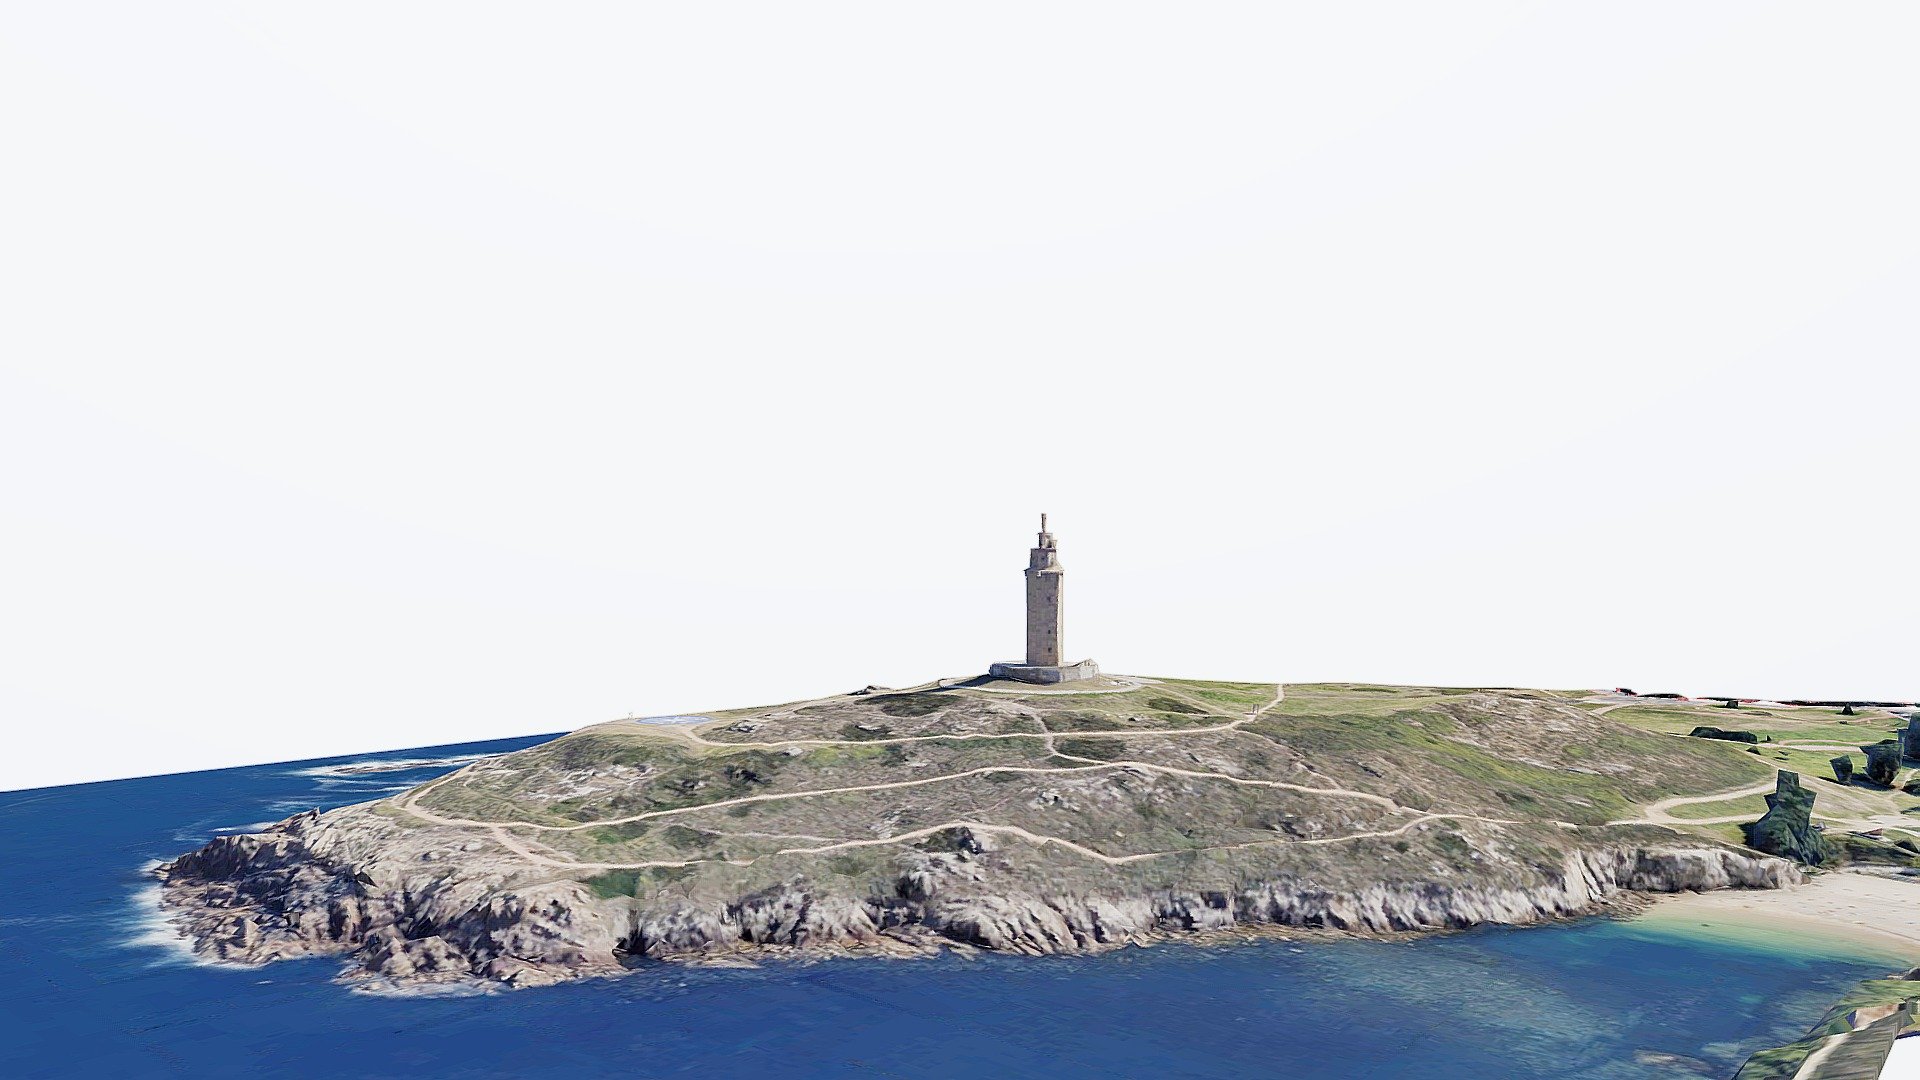 The Tower of Hercules (Spanish: Torre de Hércules) is an ancient Roman lighthouse on a peninsula about 2.4 km (1.5 mi) from the centre of A Coruña, Galicia, in north-western Spain. Until the 20th century, it was known as the &ldquo;Farum Brigantium